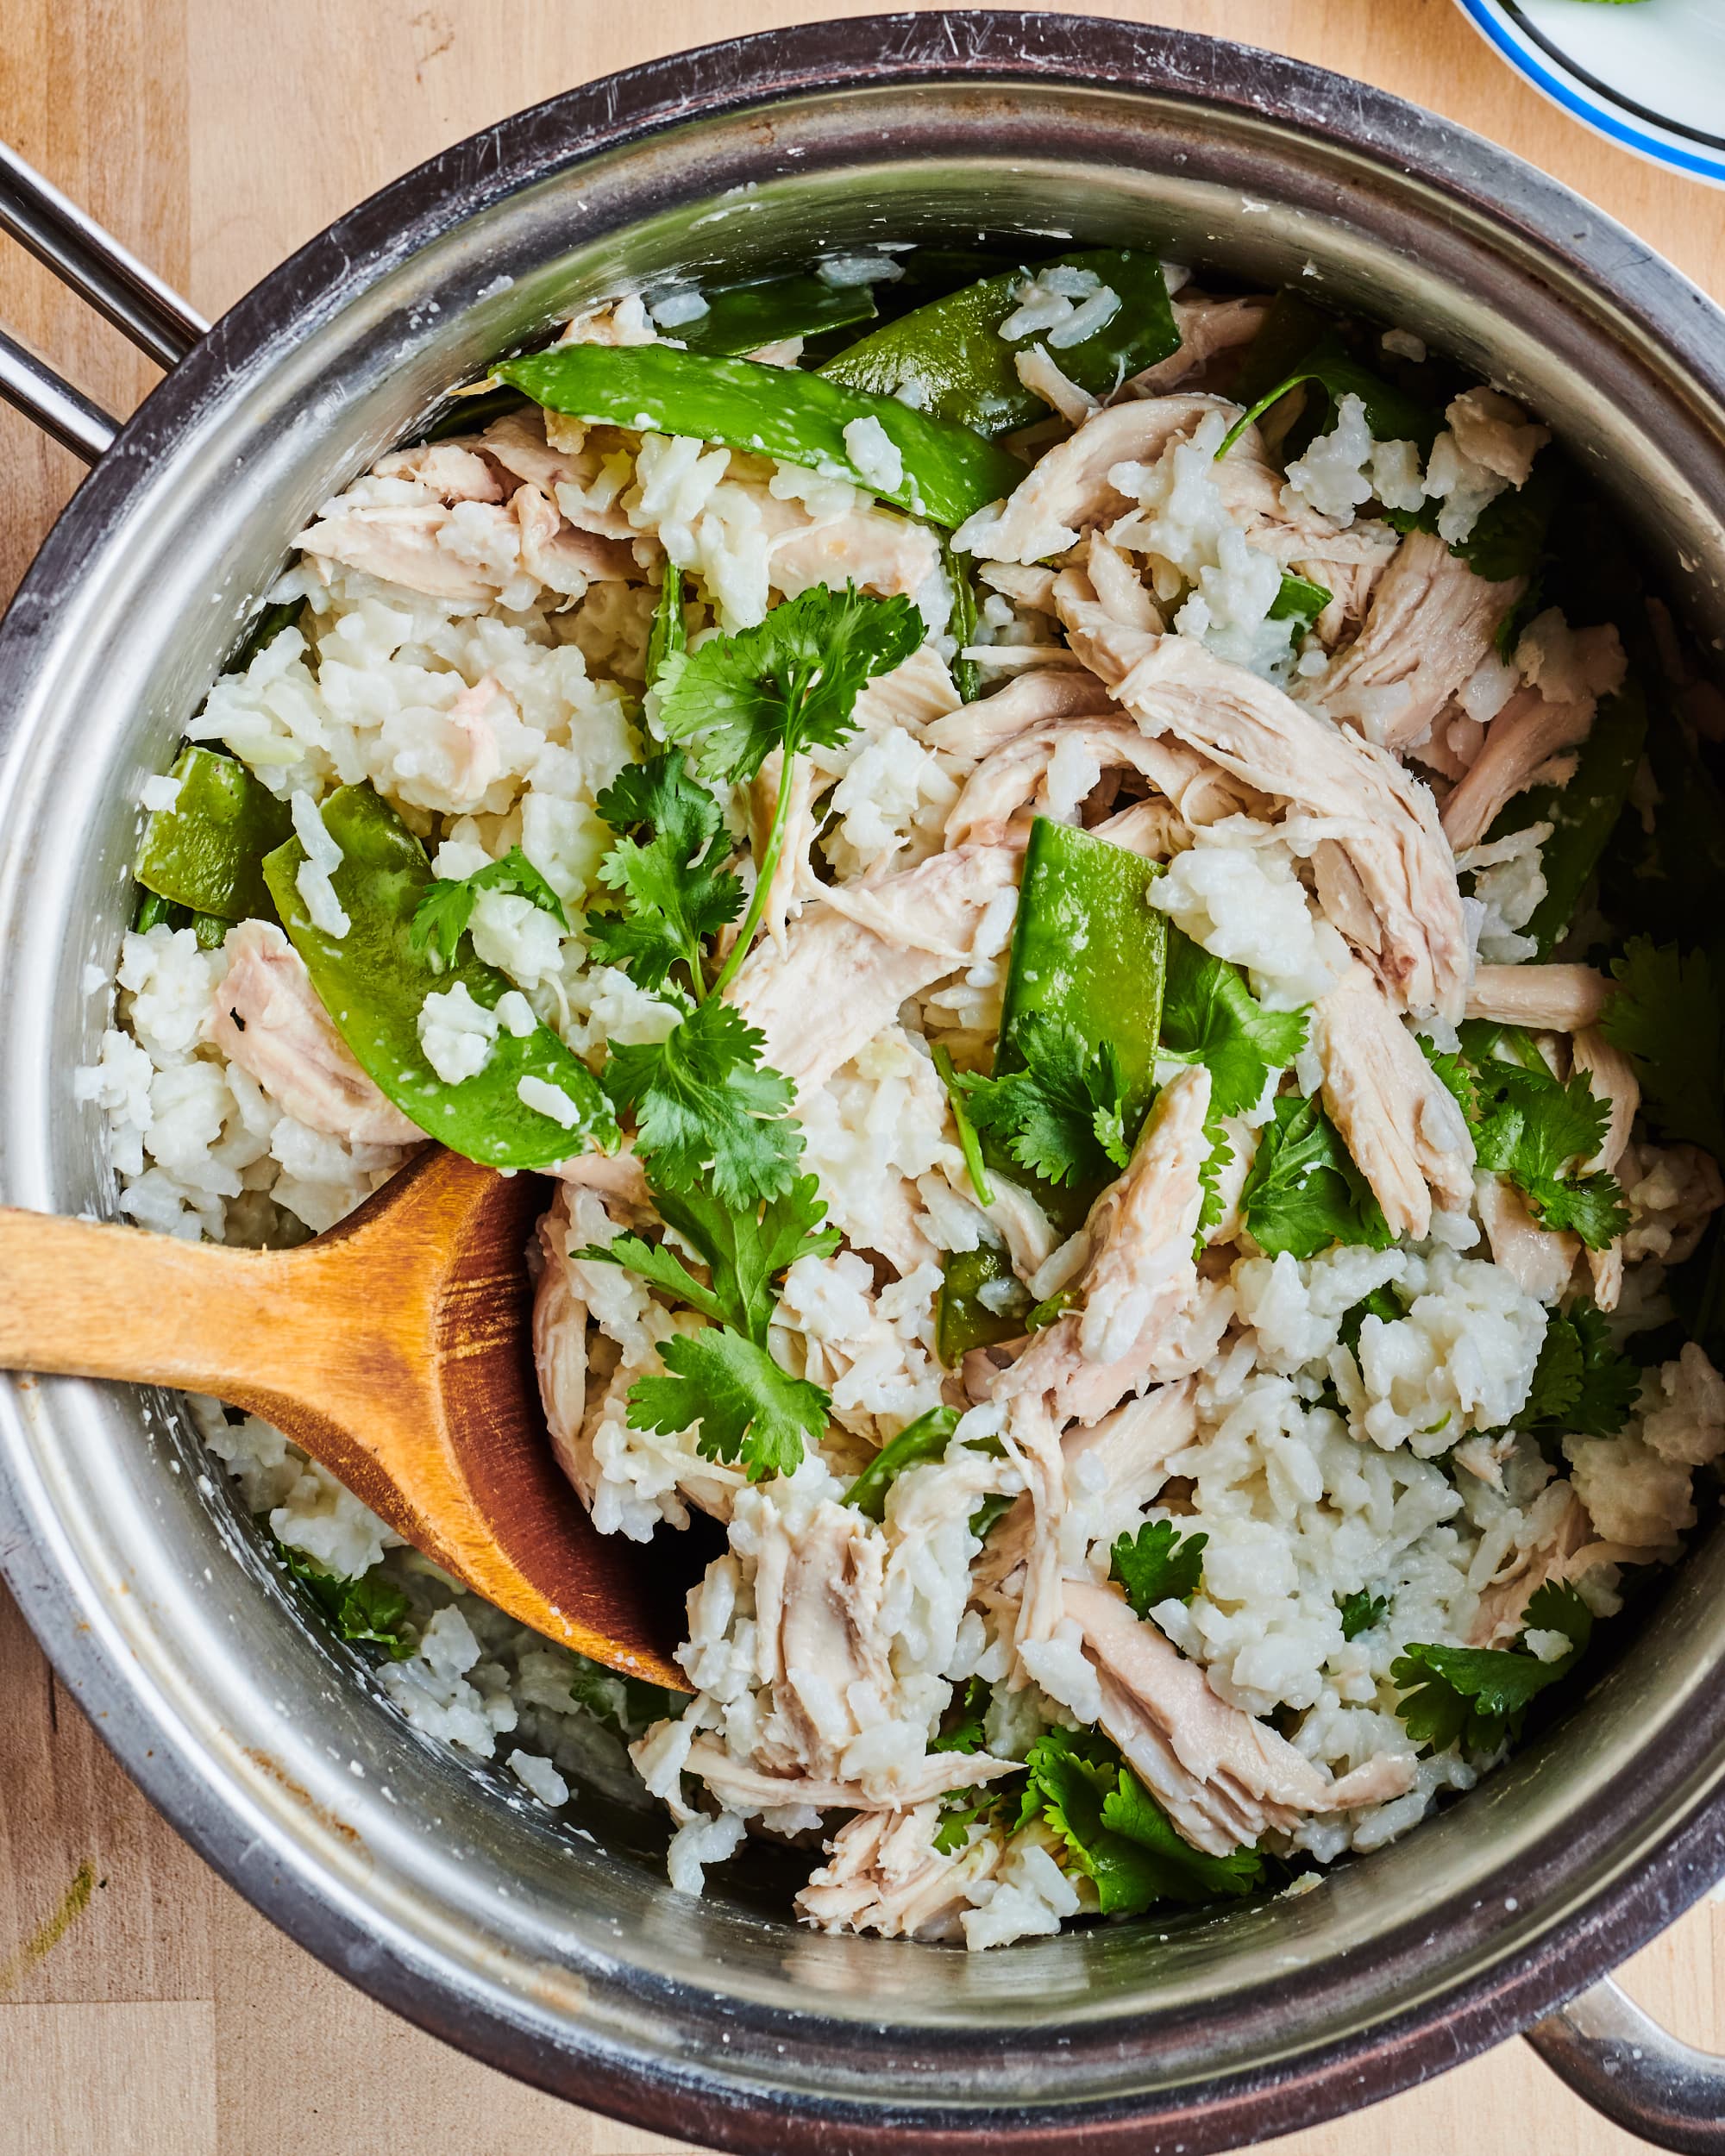 https://cdn.apartmenttherapy.info/image/upload/v1592501714/k/Photo/Series/2020-06-Snapshot-5-Quick-Dinners-That-Start-with-Rotisserie-Chicken/Snapshot-Rotisserie-Chicken_Coconut-Cilantro-Rice/2020-06-08_AT-K19109_1.jpg